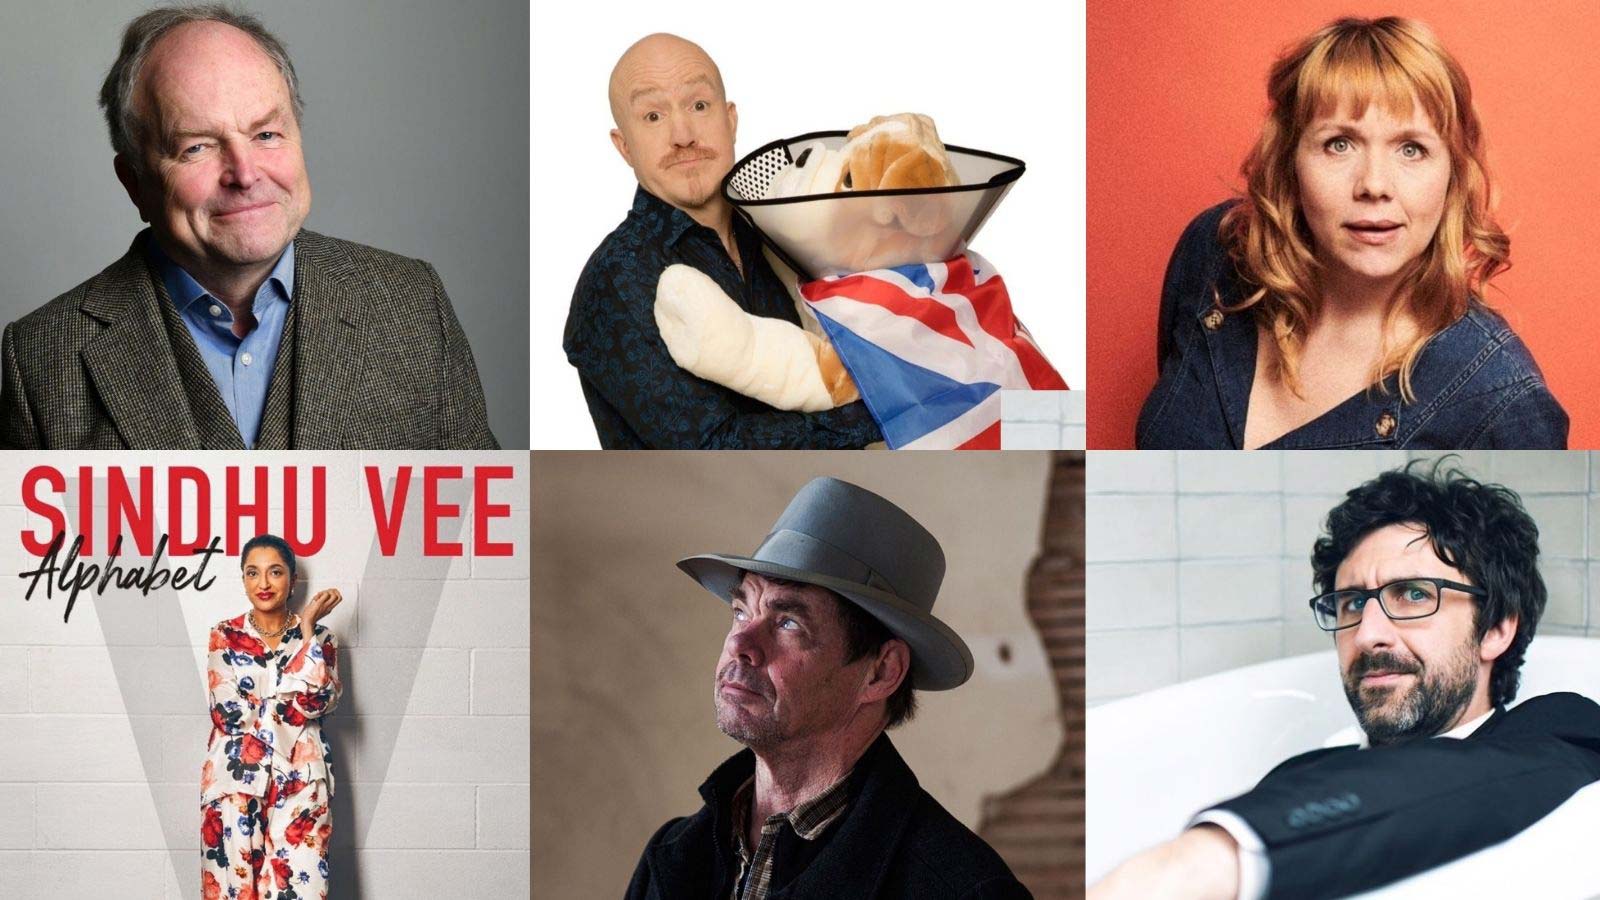 Six popular comedians are pictured who'll be performing at the Quad Theatre - Clive Anderson, Andy Parsons, Kelly Godliman, Sindhu Vee, Rich Hall and Mark Watson